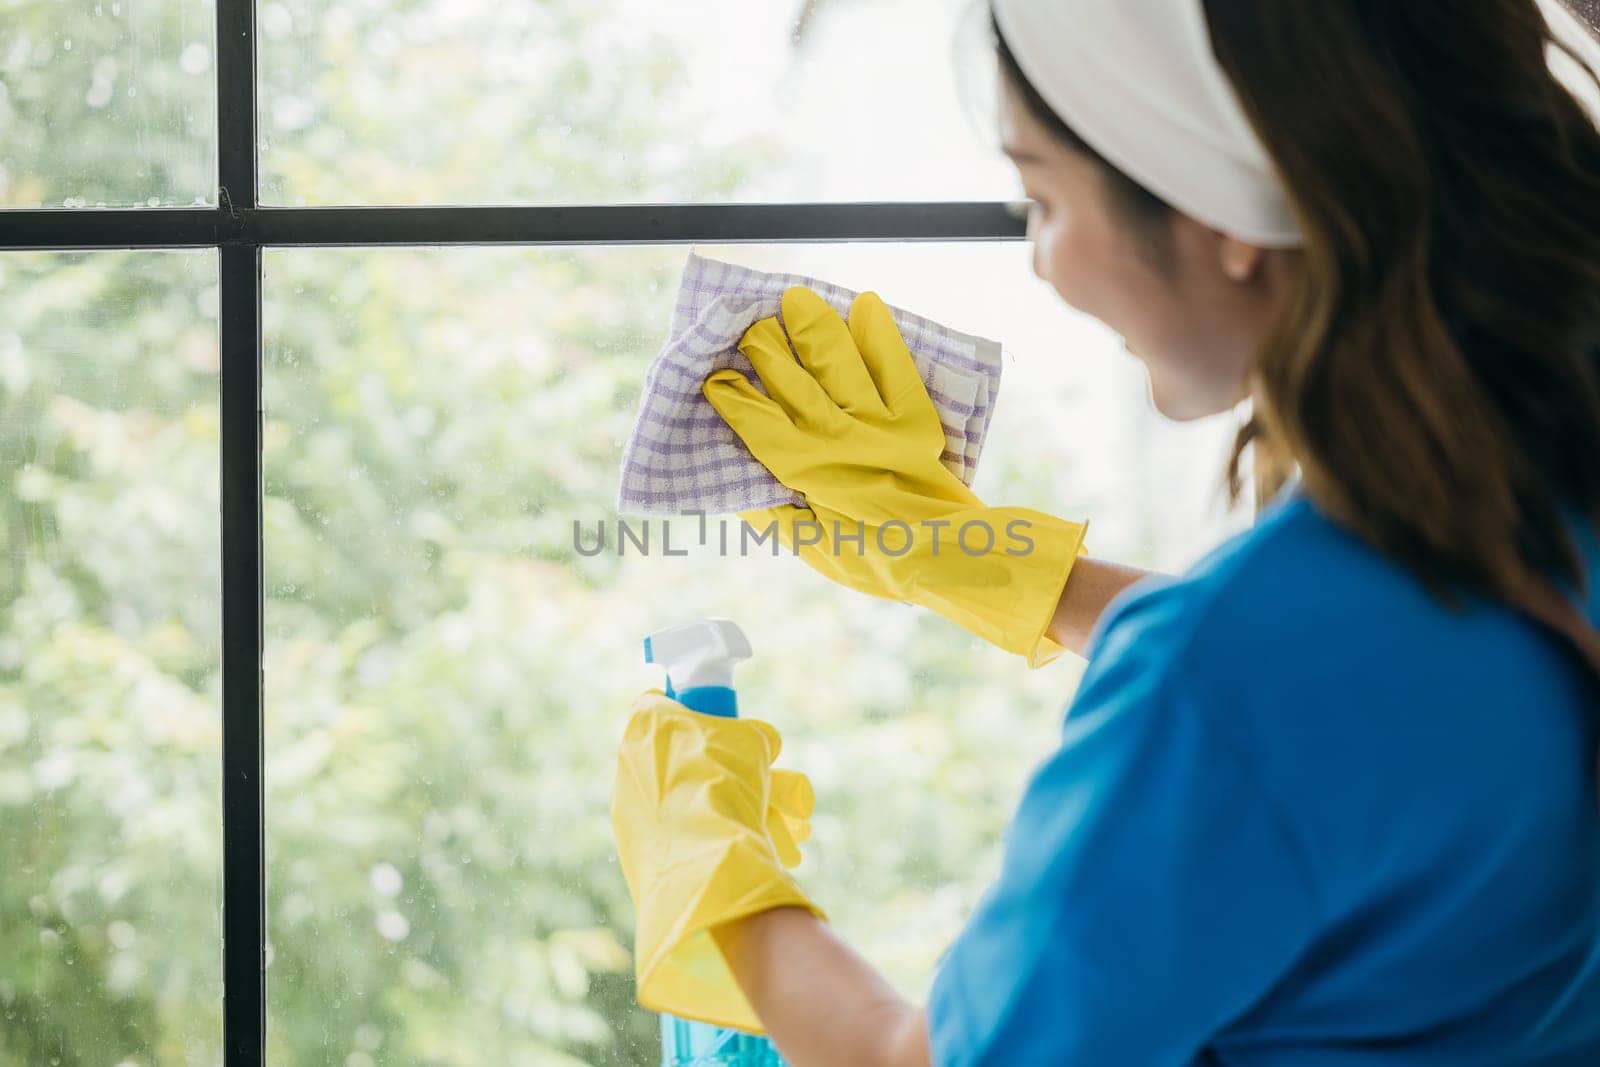 A happy maid cleans windows with a spray wearing gloves and wiping with a cloth. Her dedication to housework and hygiene ensures sparkling transparent windows in an office.